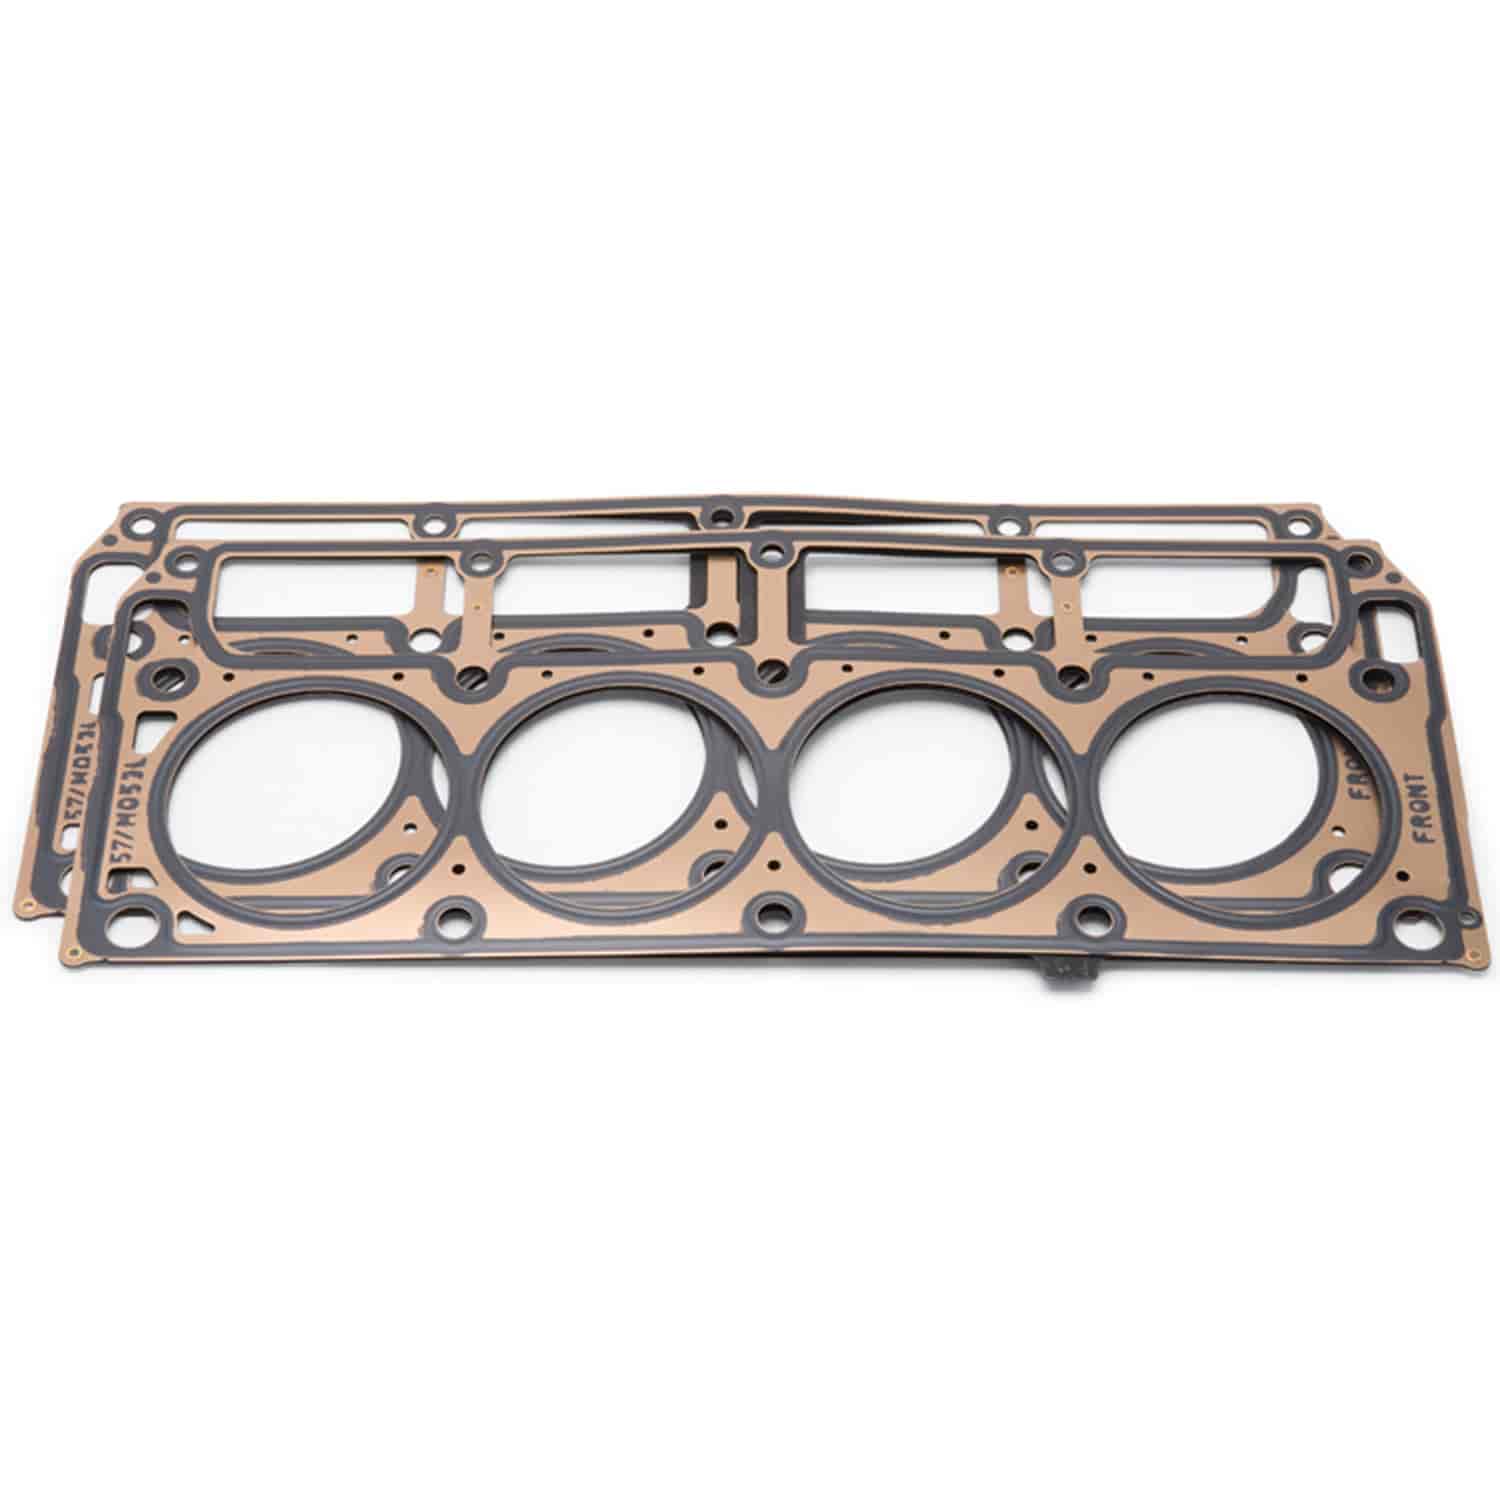 Head Gaskets for 1997-Later LS1 5.7L